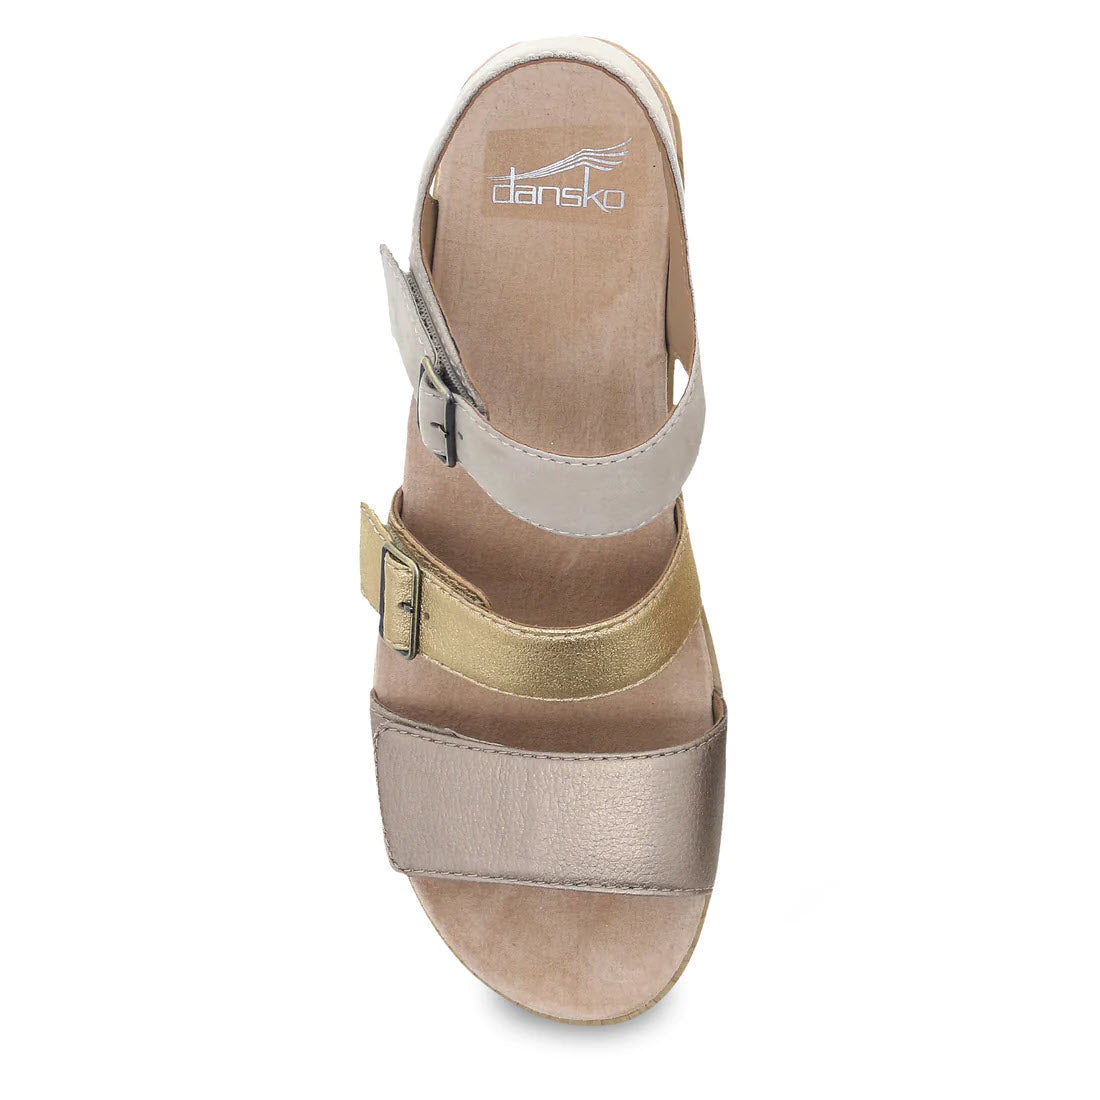 Top view of a Dansko Malena Metallic Multi women&#39;s triple strap sandal with metallic and beige leather straps and buckles on a white background.